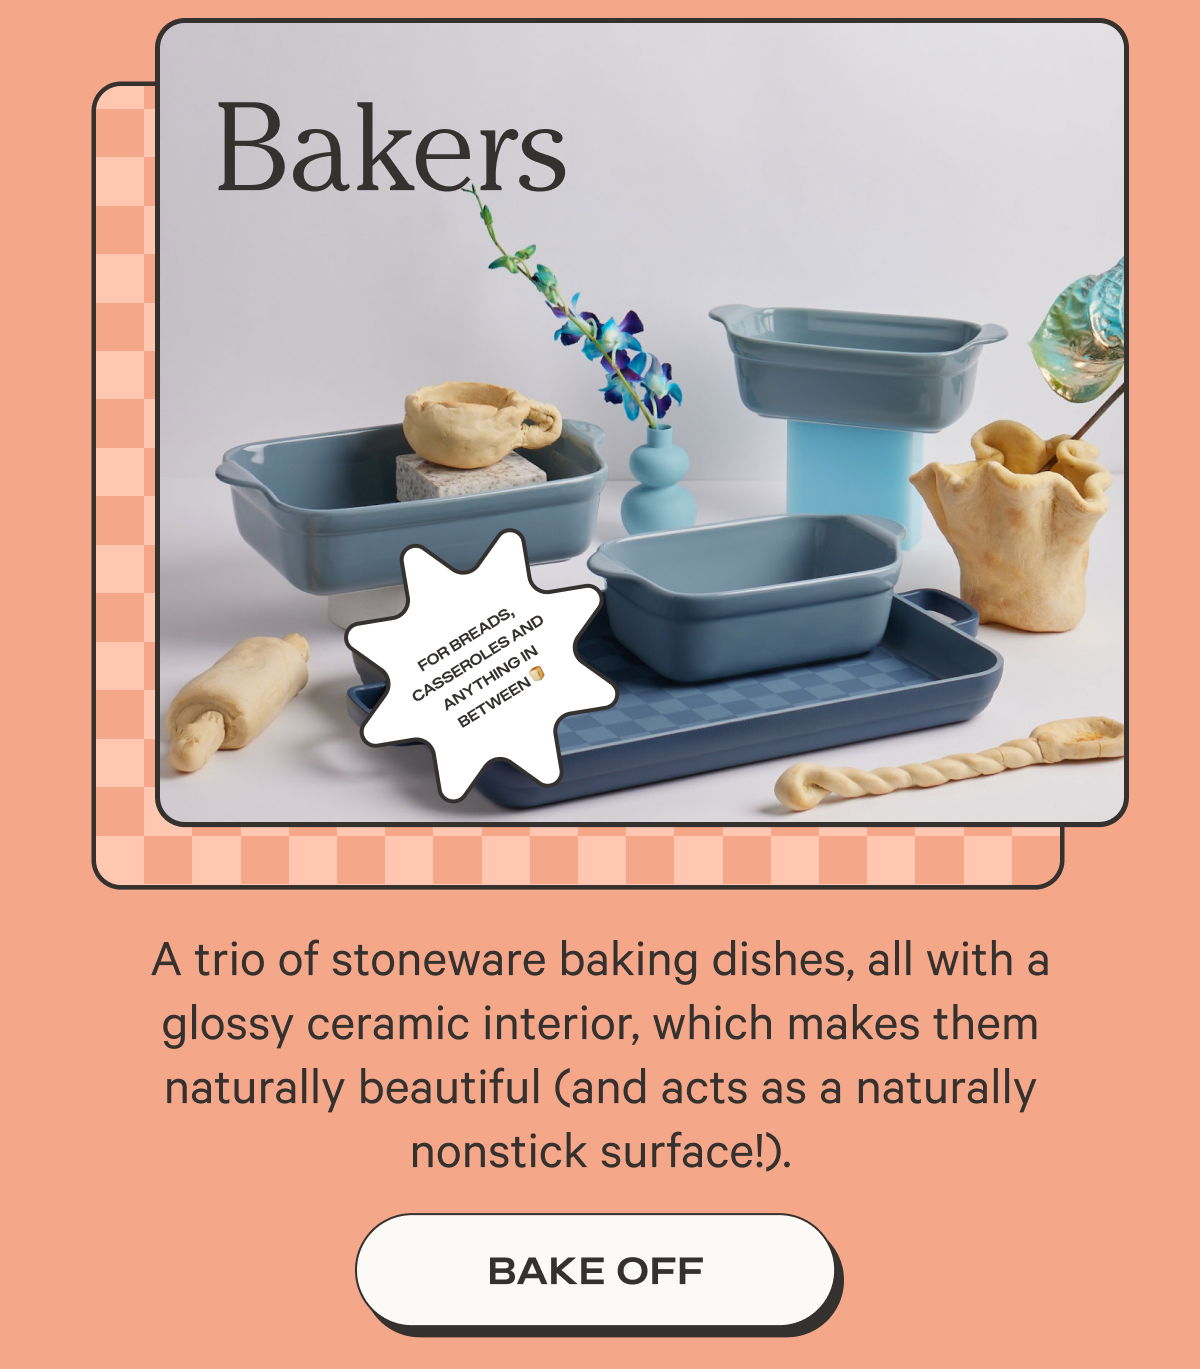 Bakers - A trio of stoneware baking dishes, all with a glossy ceramic interior, which makes them naturally beautiful (and acts as a naturally nonstick surface!).  - Bake Off